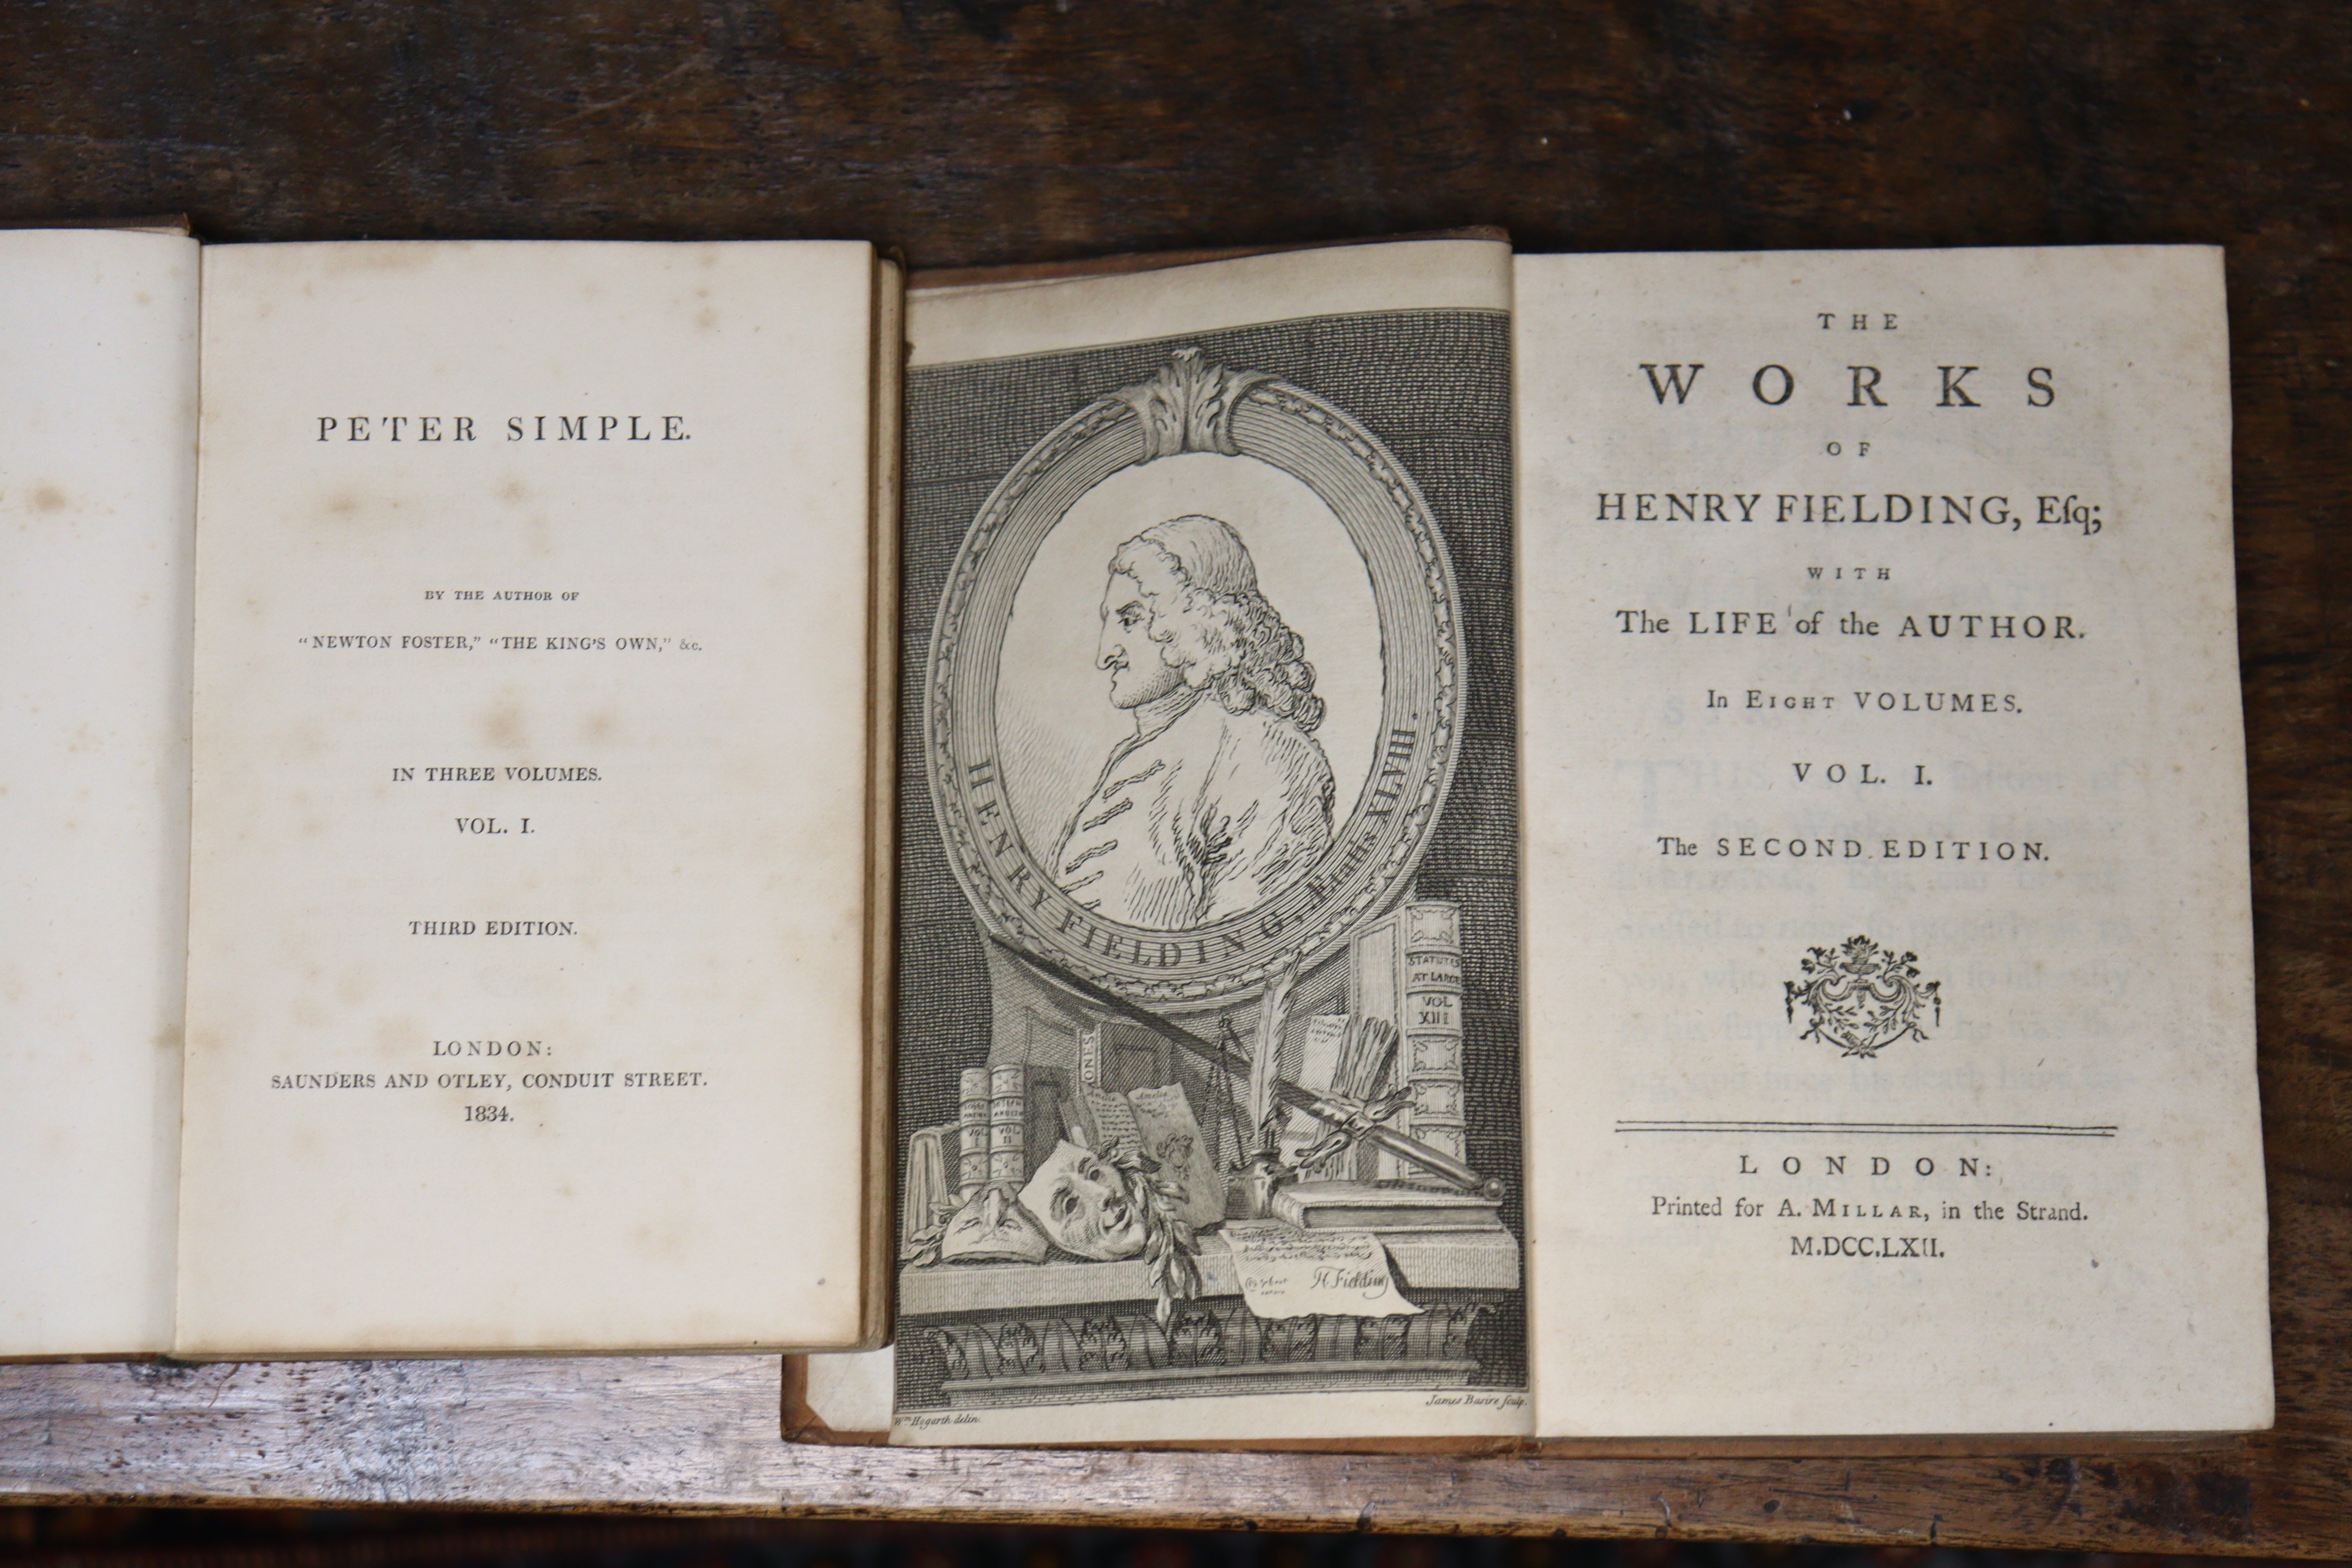 The Works of Henry Fielding, Esq., vols I, II, III & V (of 8), Published 1757, London by A Millar, - Image 3 of 4